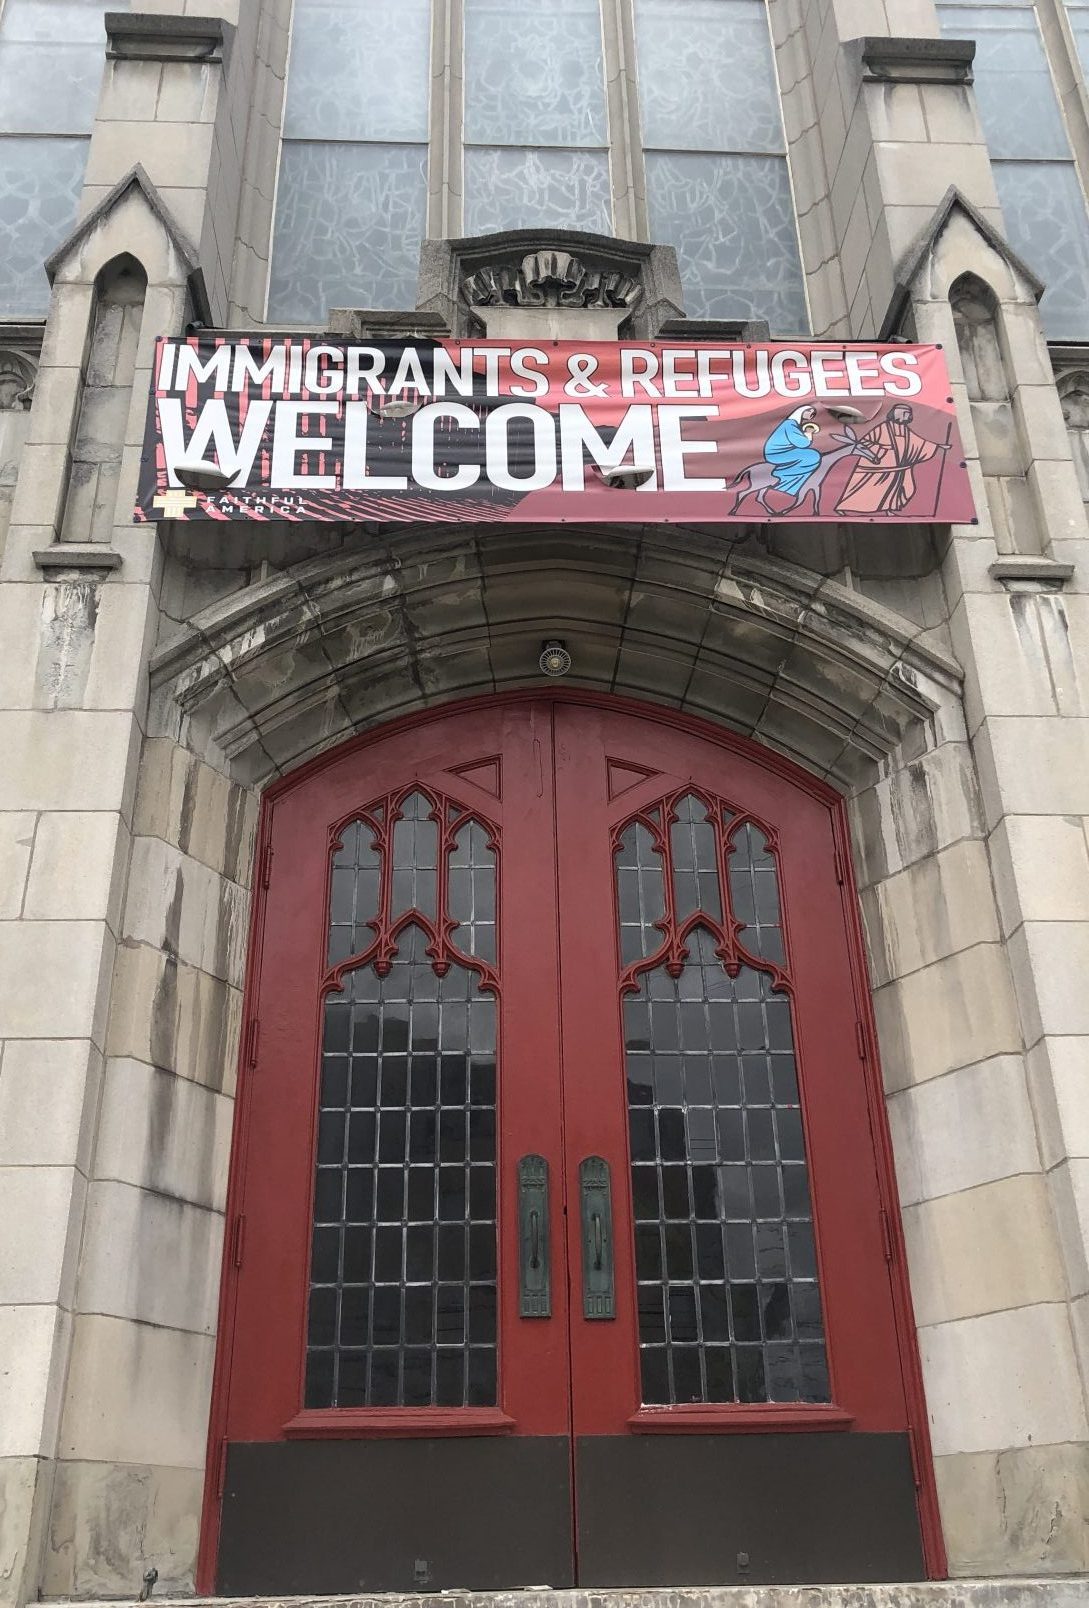 University United Methodist Church in Syracuse showing their support for refugees